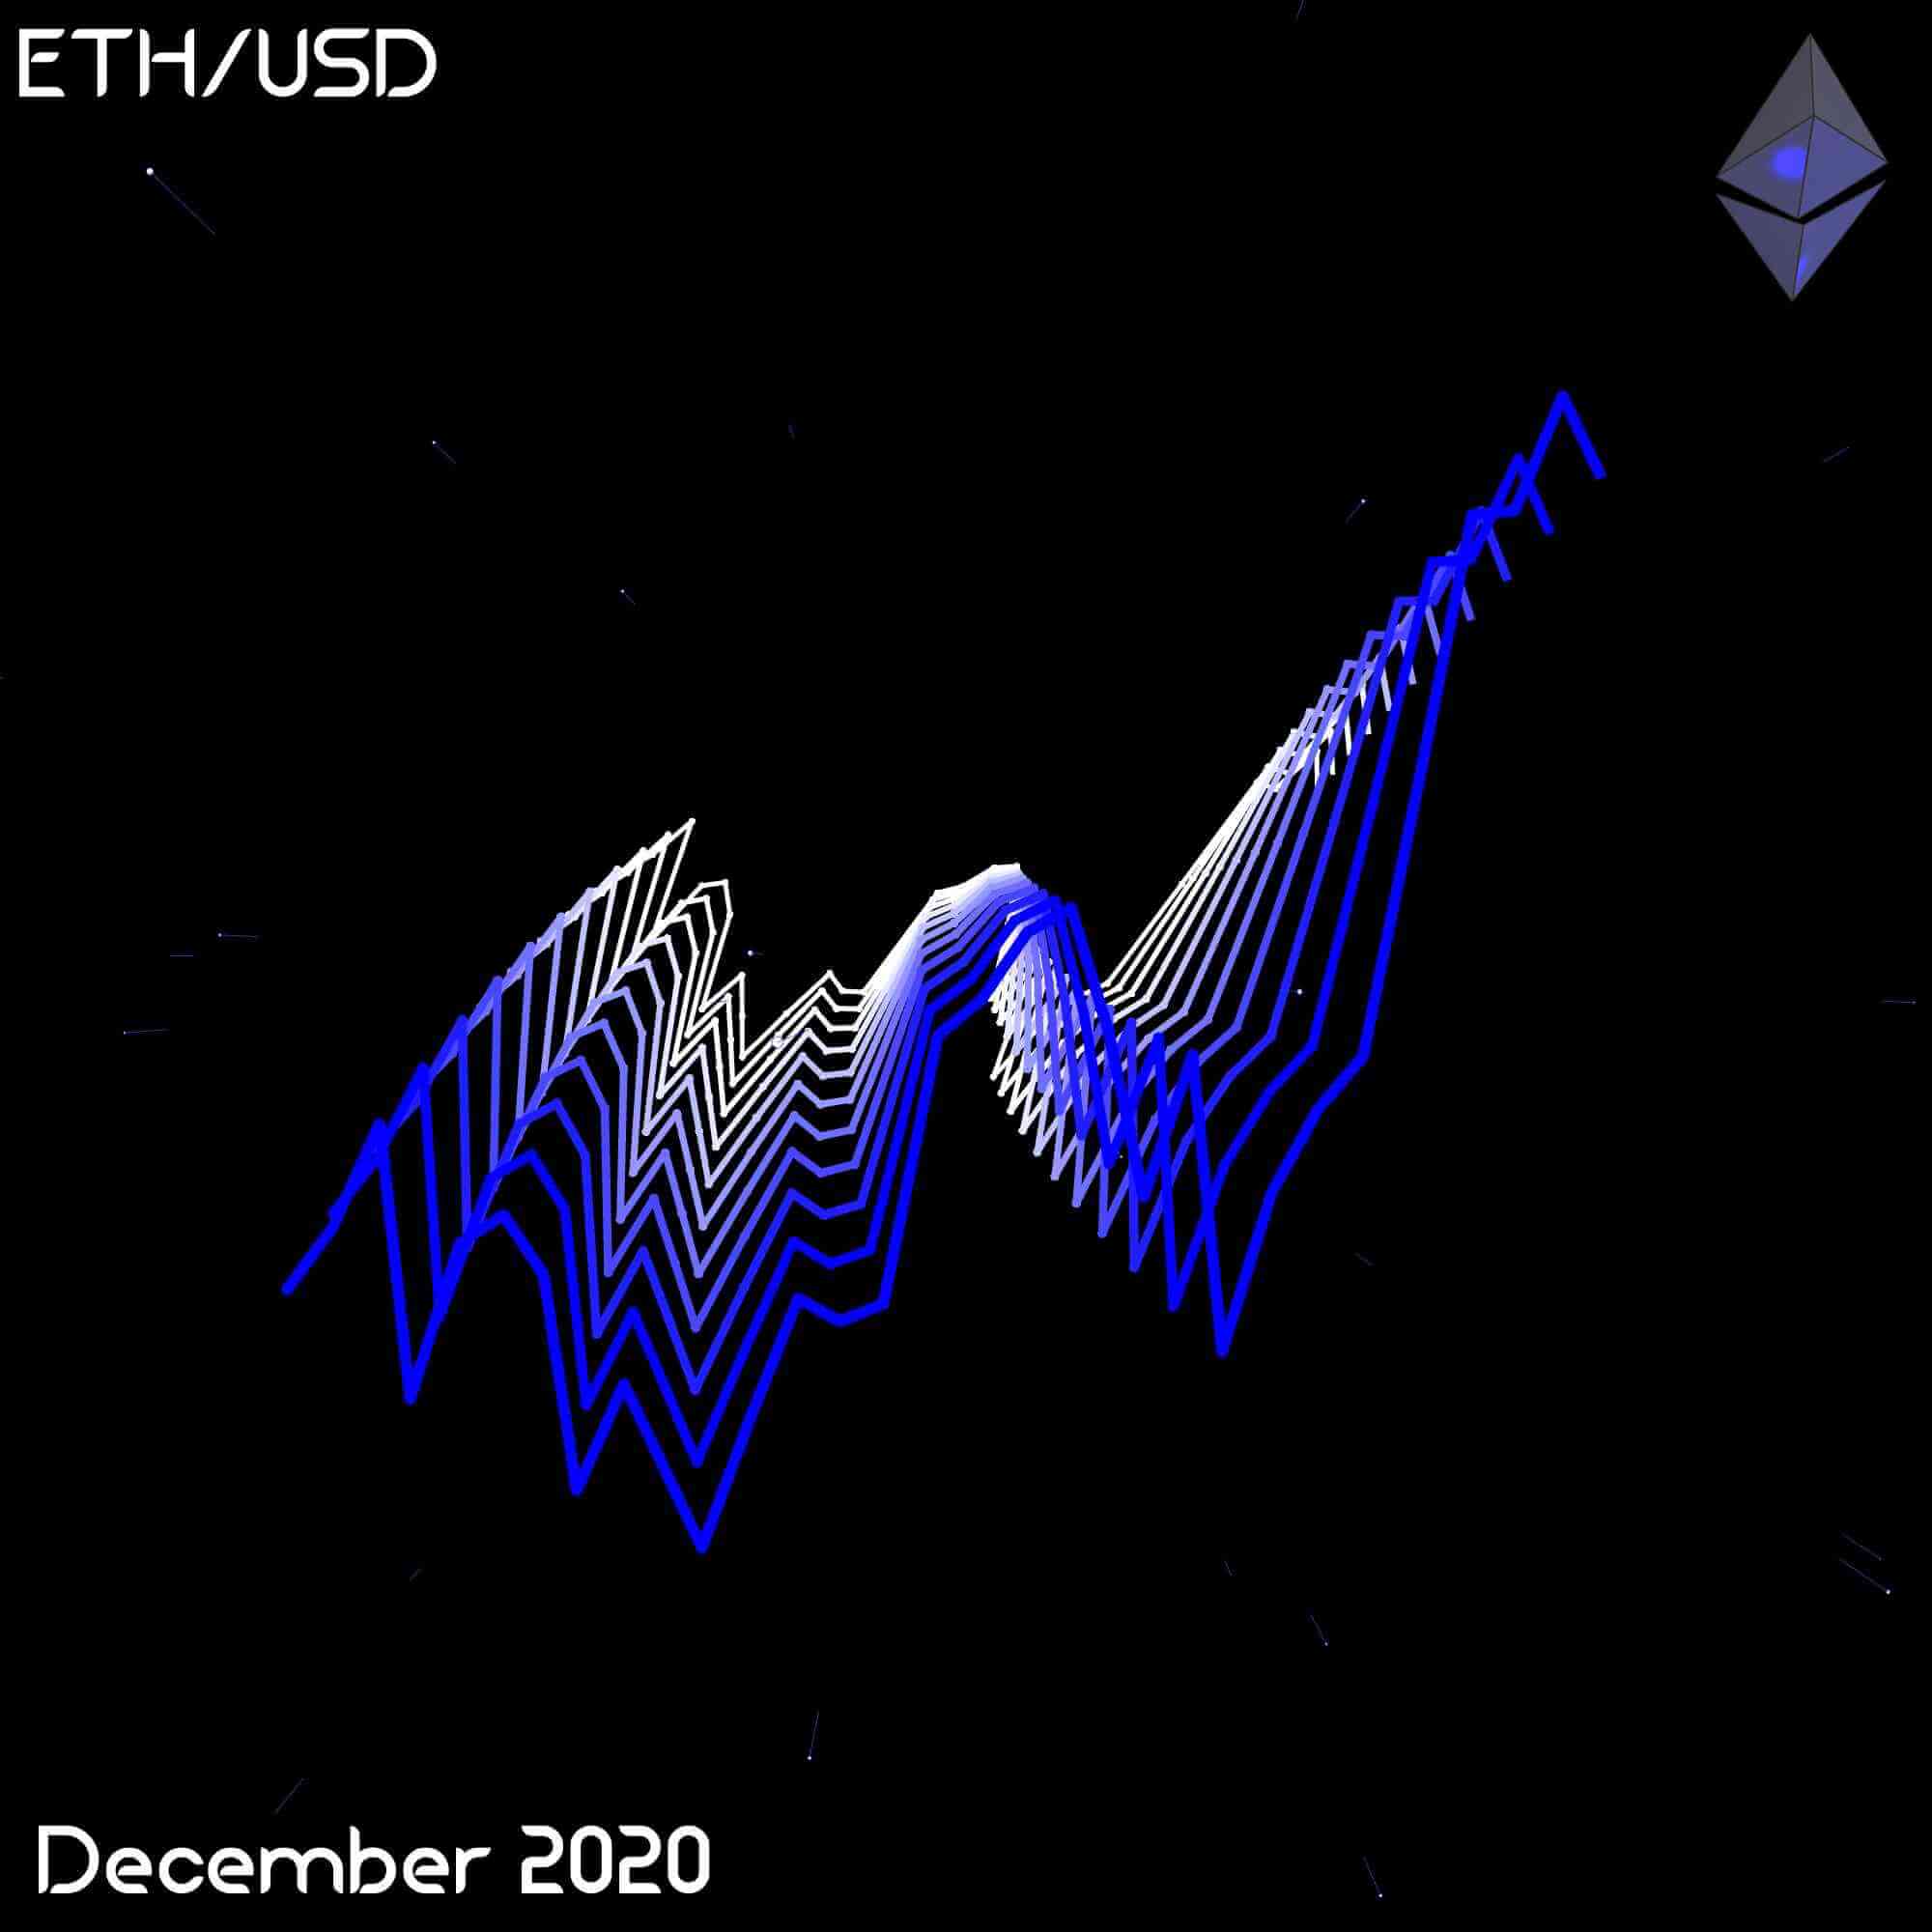 Image of the PriceArt ETH NFTs project